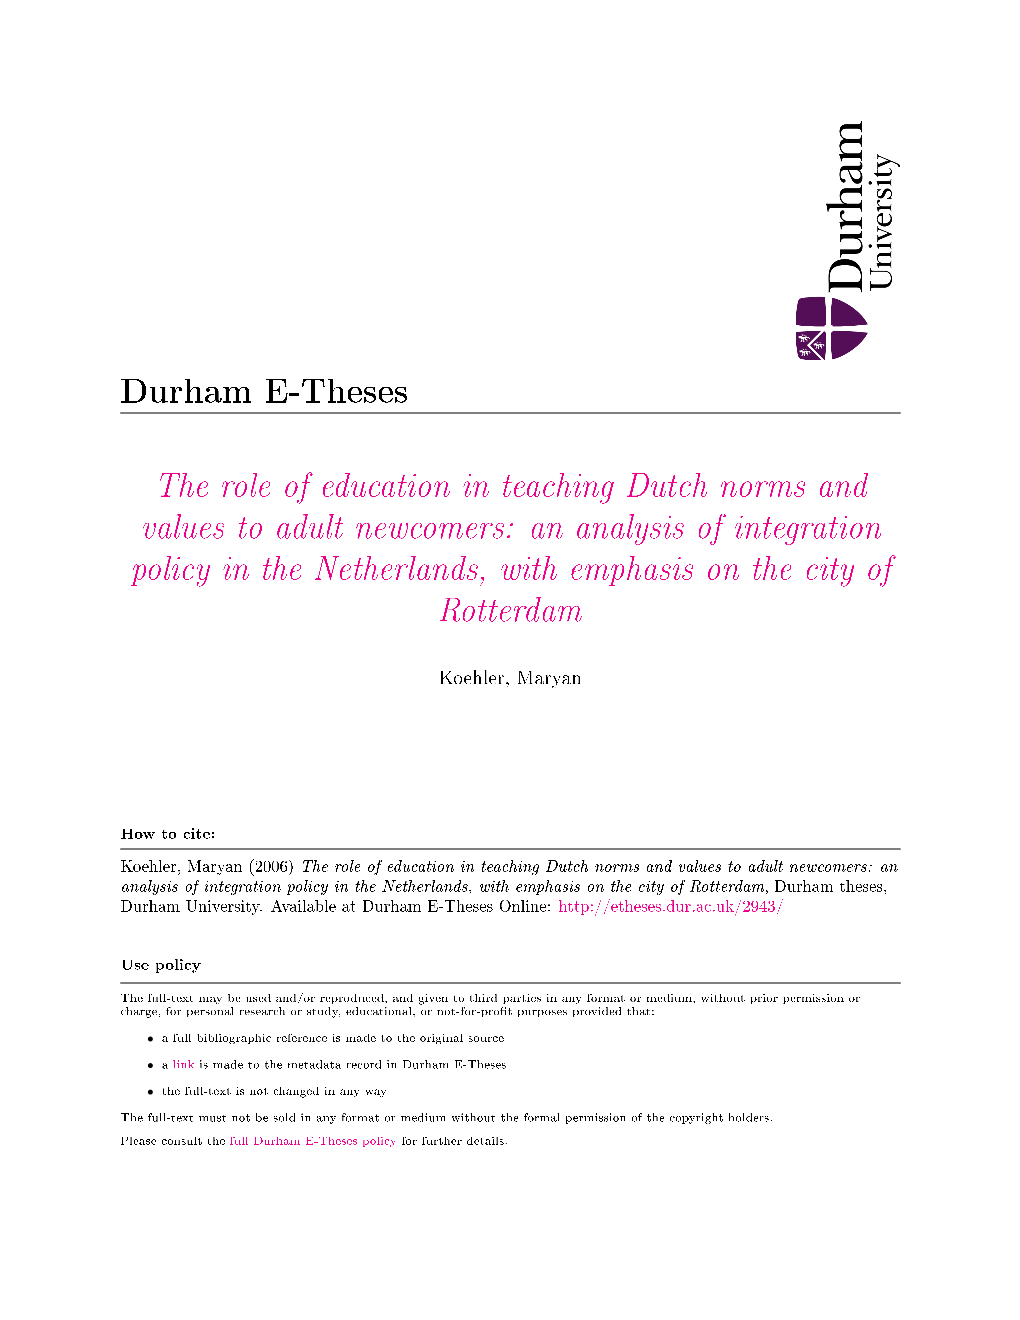 The Role of Education in Teaching Norms and Values